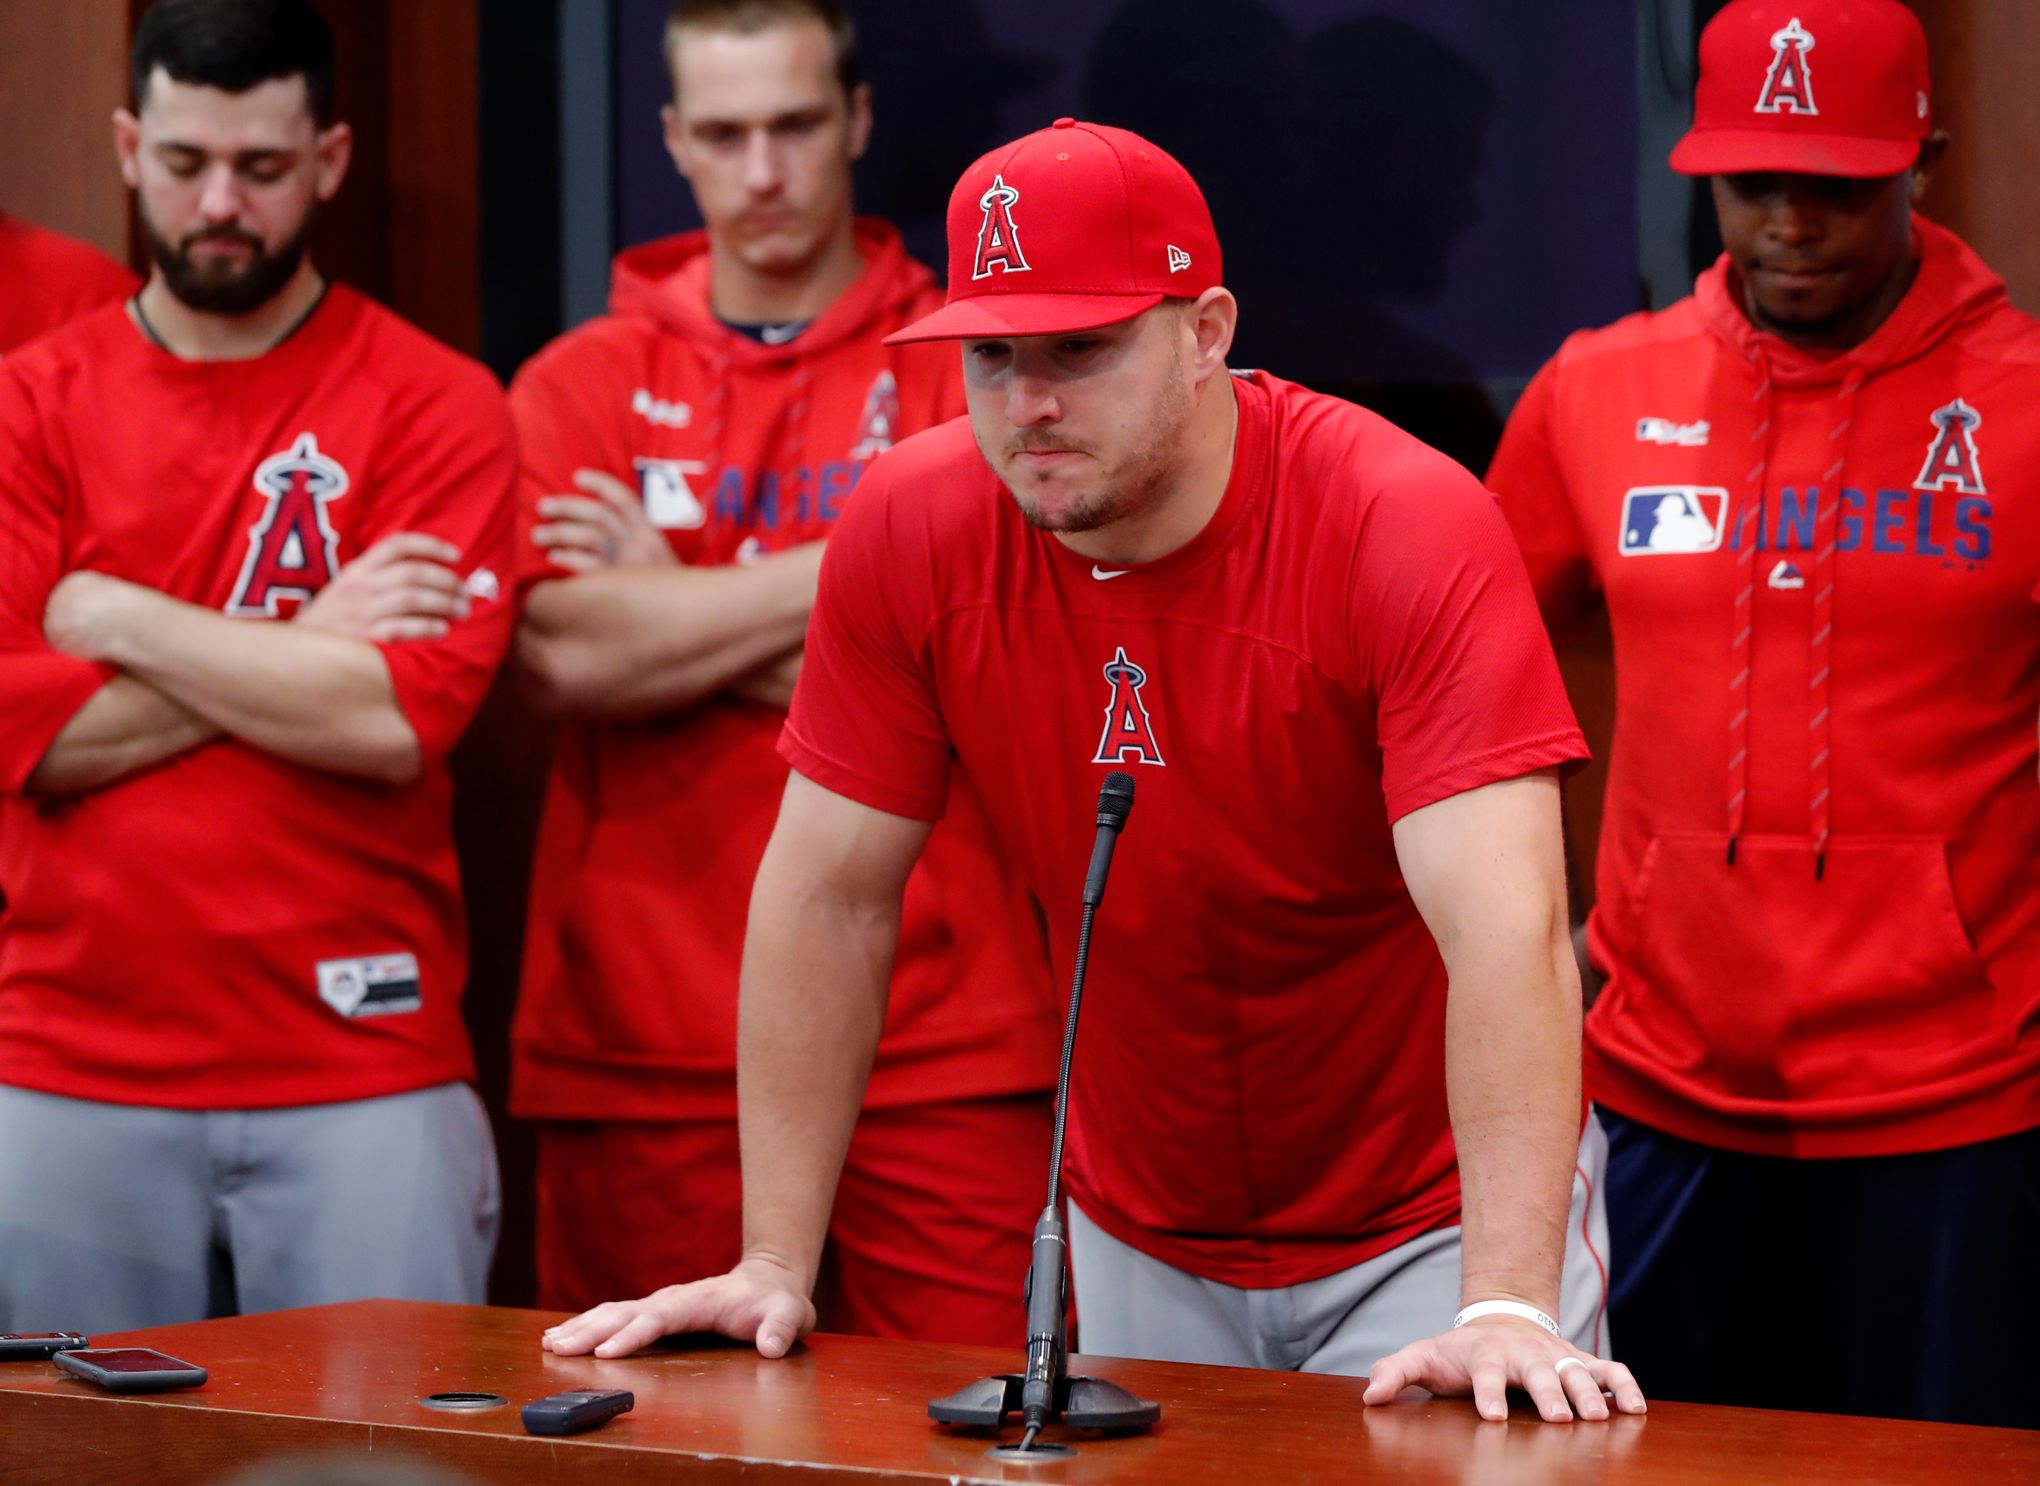 Questions surrounding Tyler Skaggs' death need answers